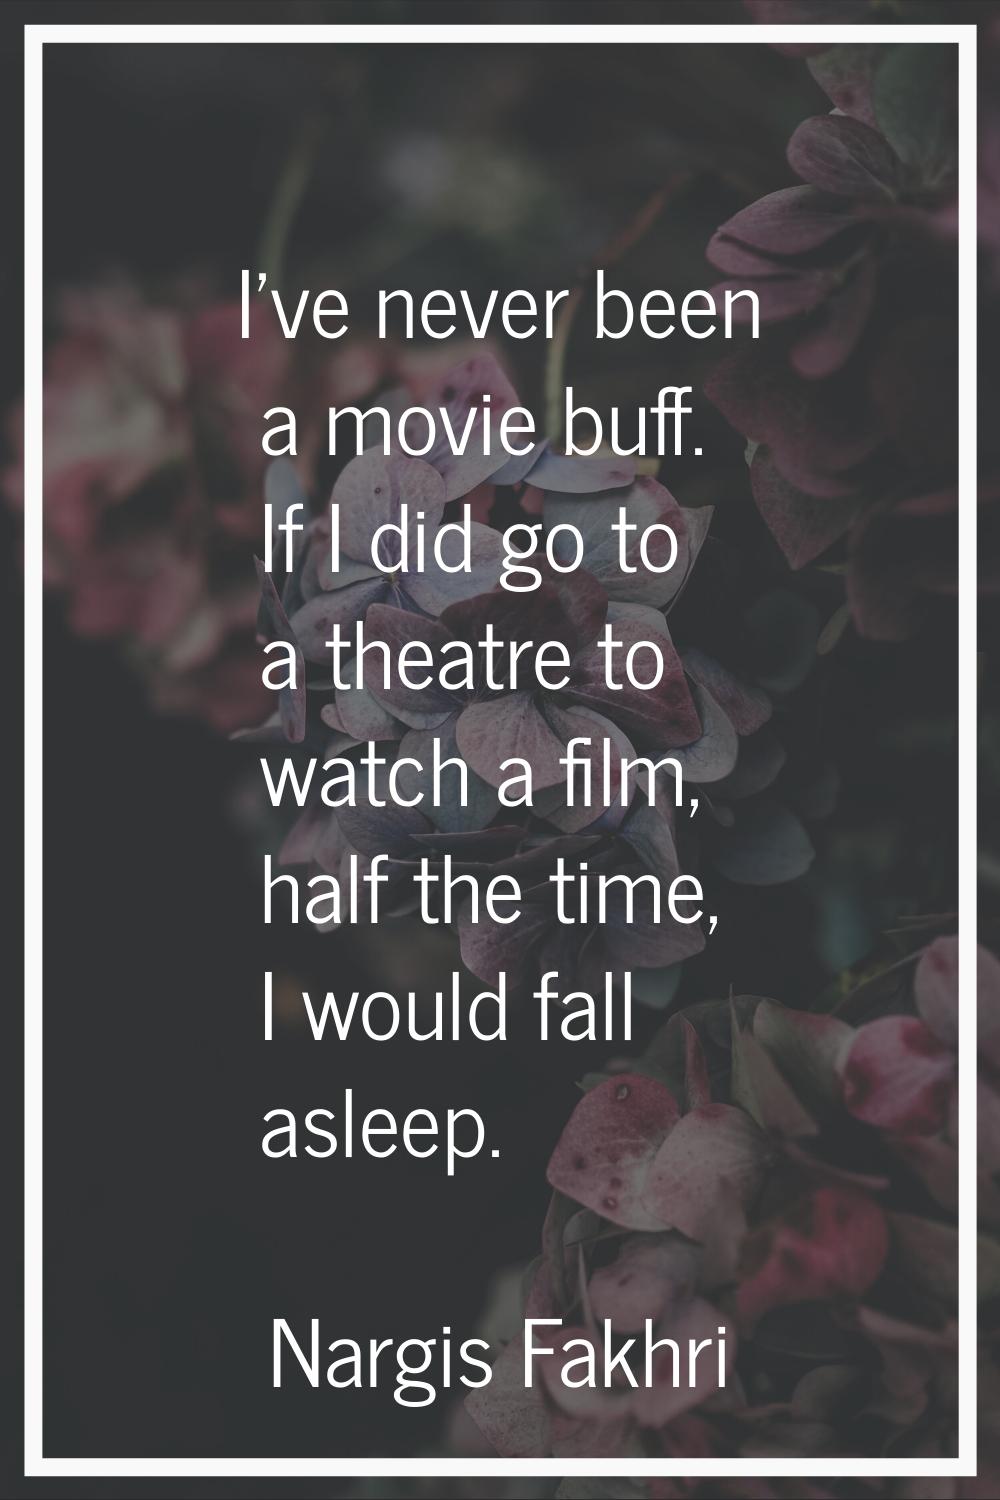 I've never been a movie buff. If I did go to a theatre to watch a film, half the time, I would fall